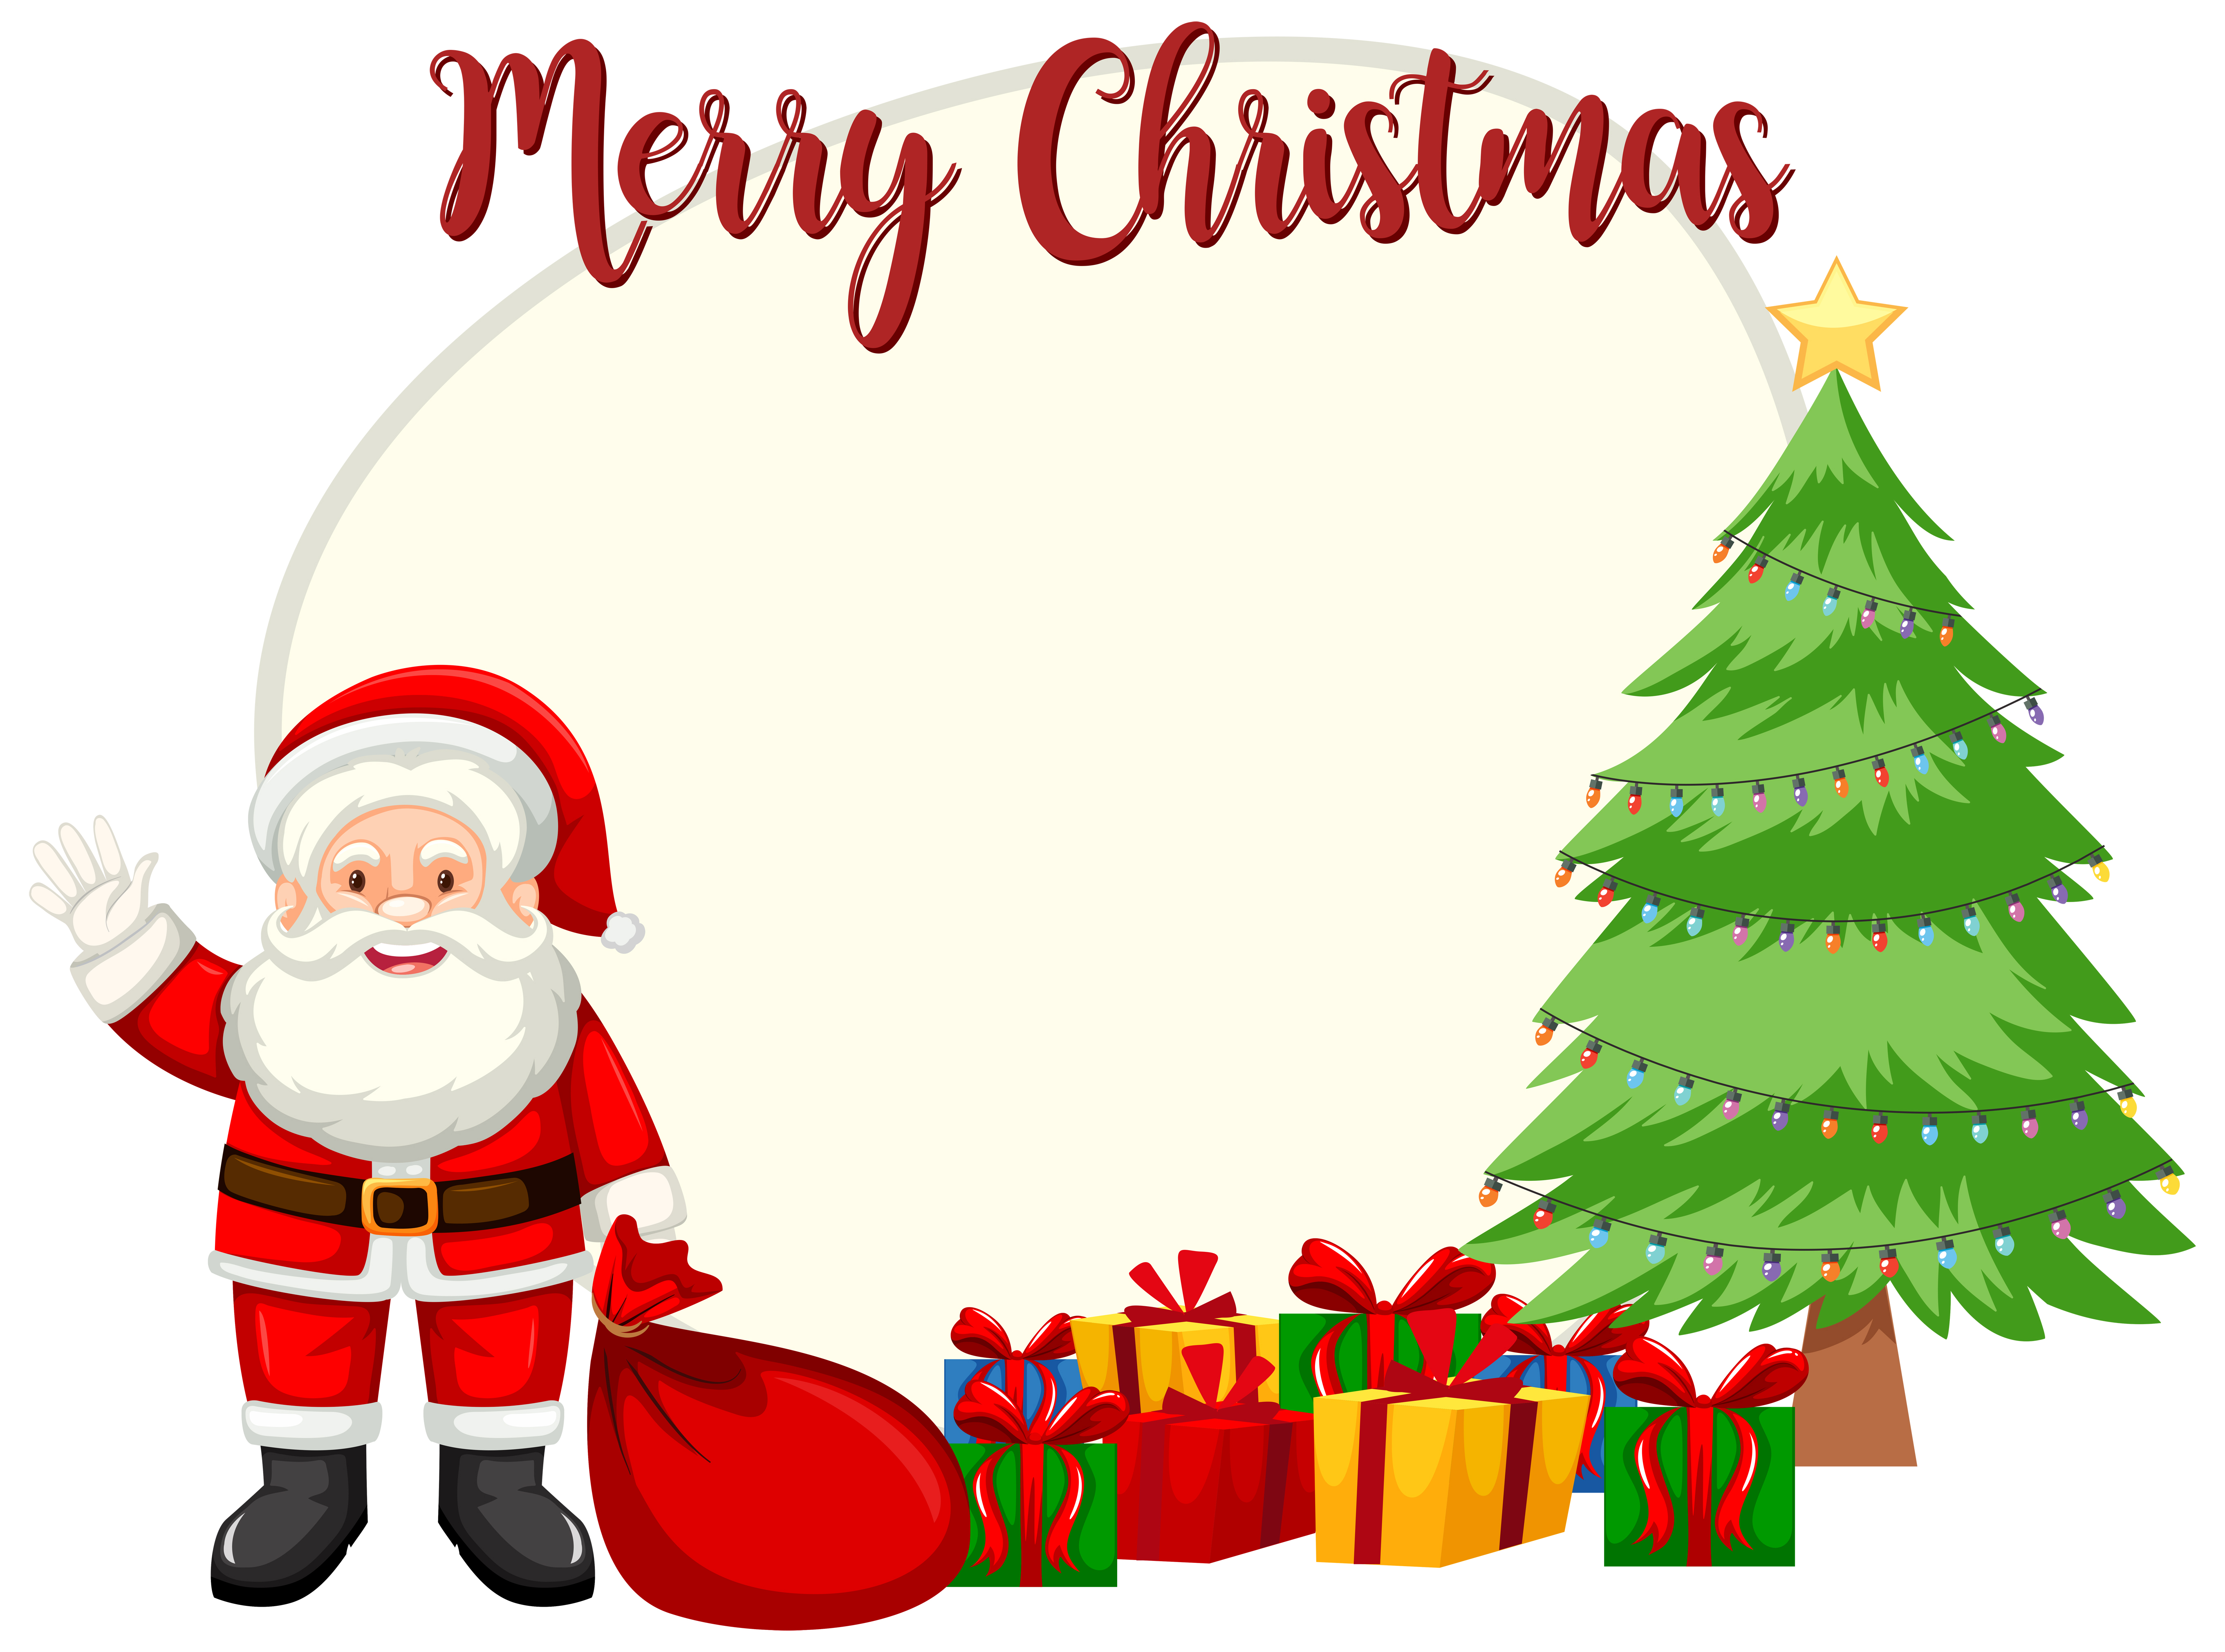 Merry Christmas card template 293723 Download Free Vectors, Clipart